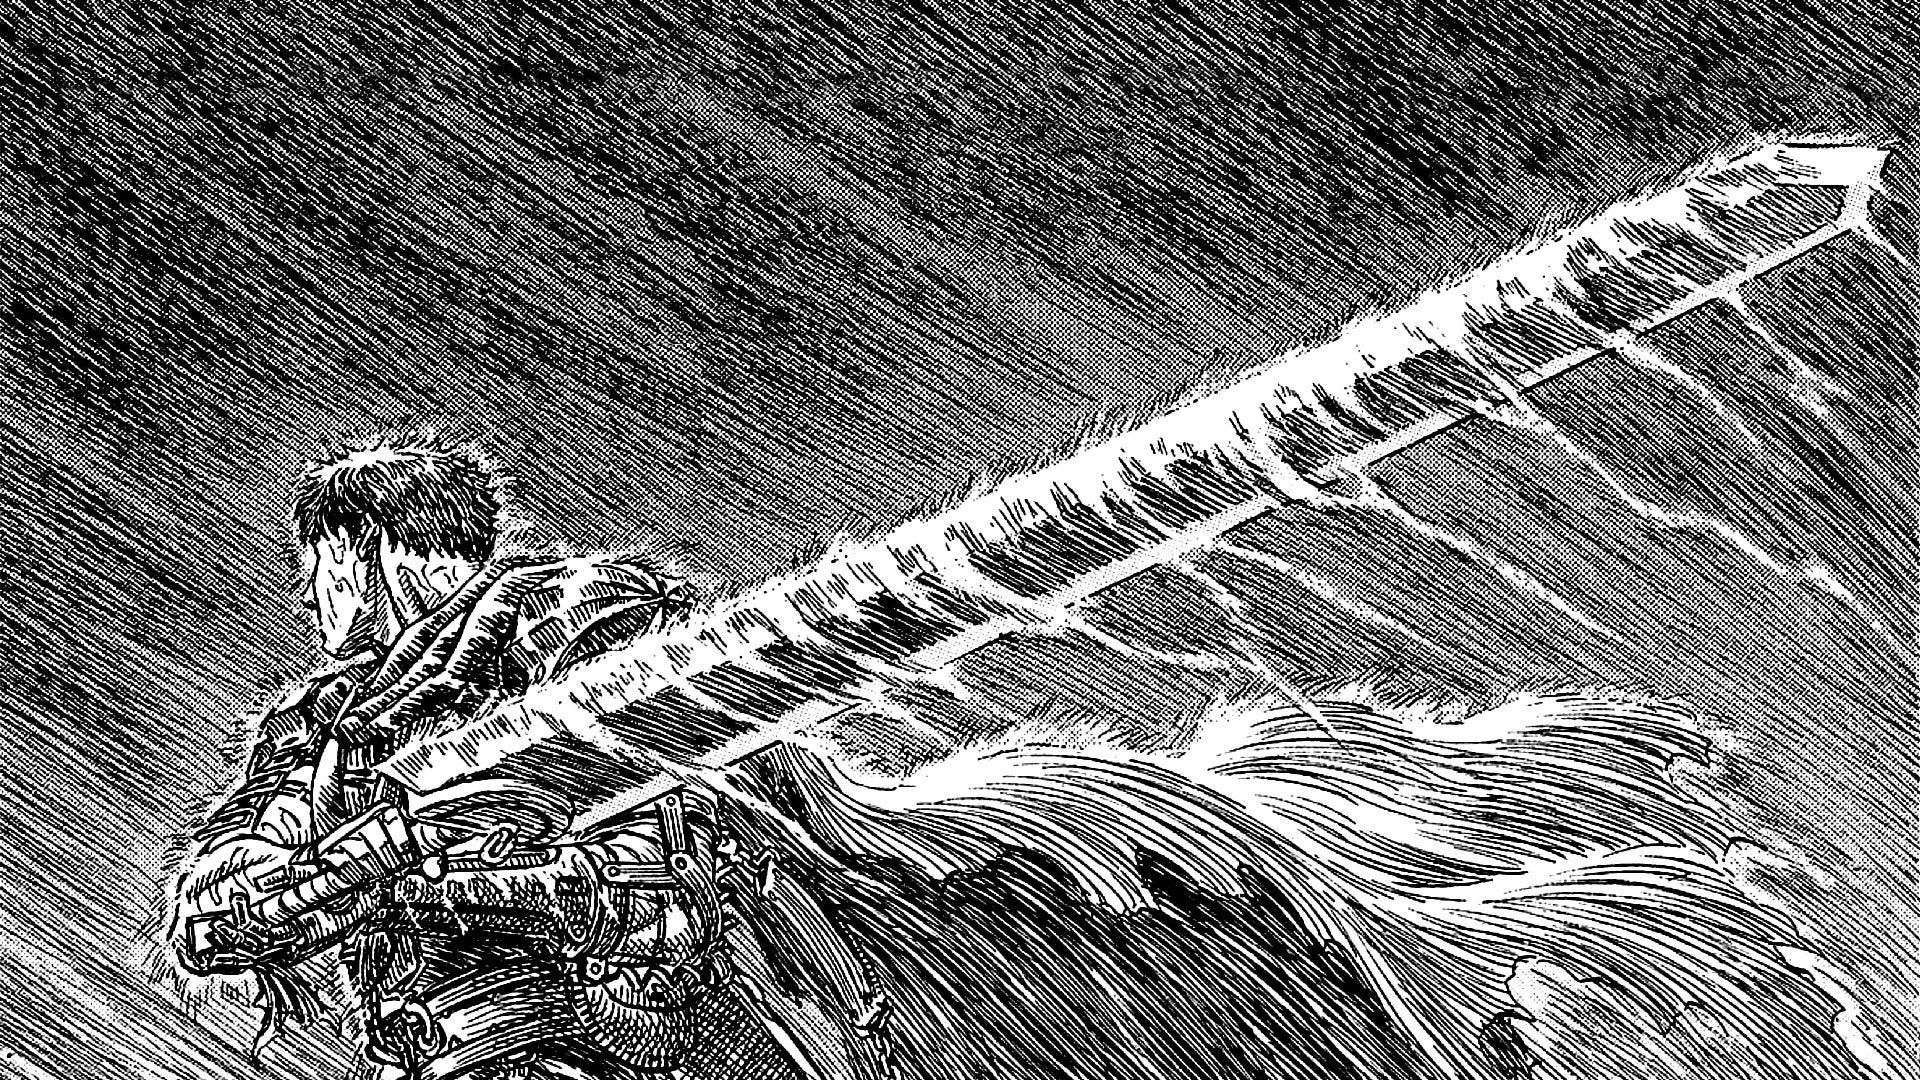 Huge Berserk Wallpaper Dump (All 1920x 143+)'ve been turning my favorite Berserk panels into wallpaper and I'm adding to it all the time. Enjoy!